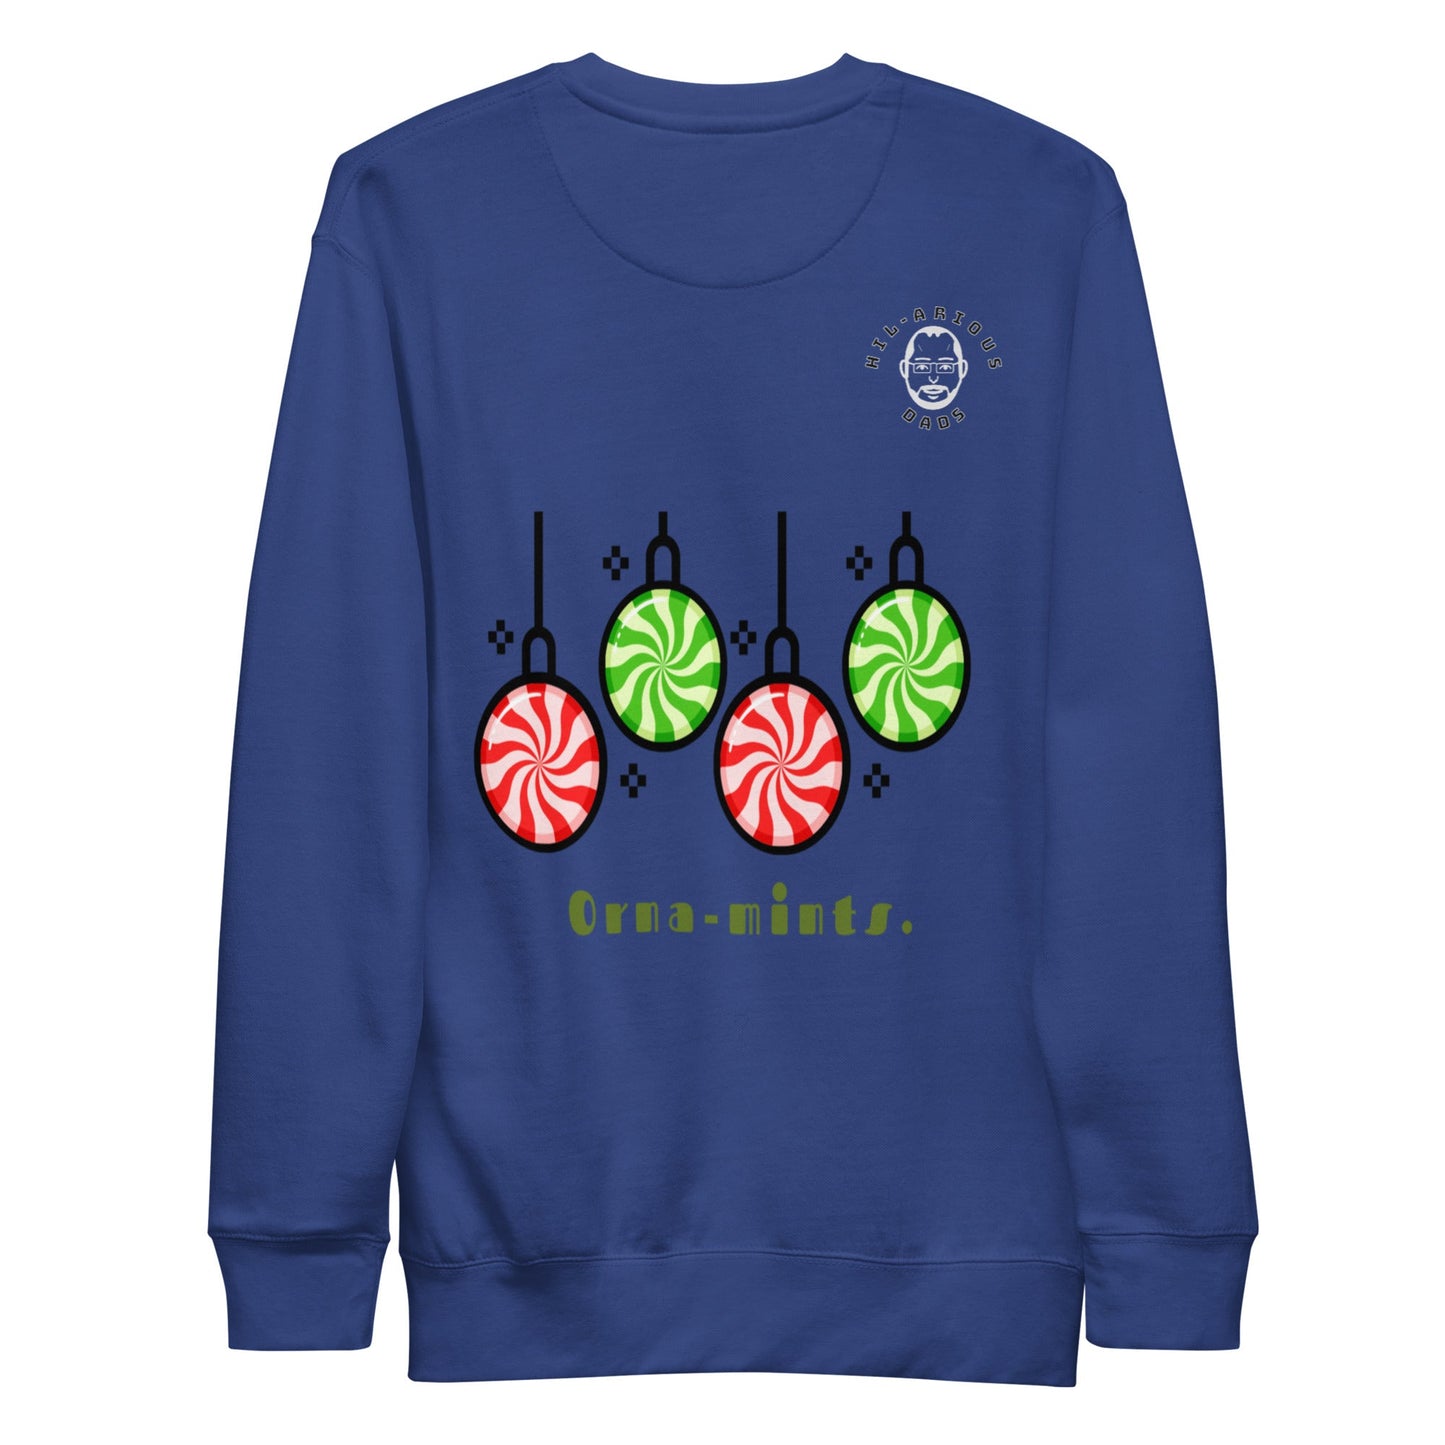 What’s a Christmas tree’s favorite candy?-Sweatshirt - Hil-arious Dads